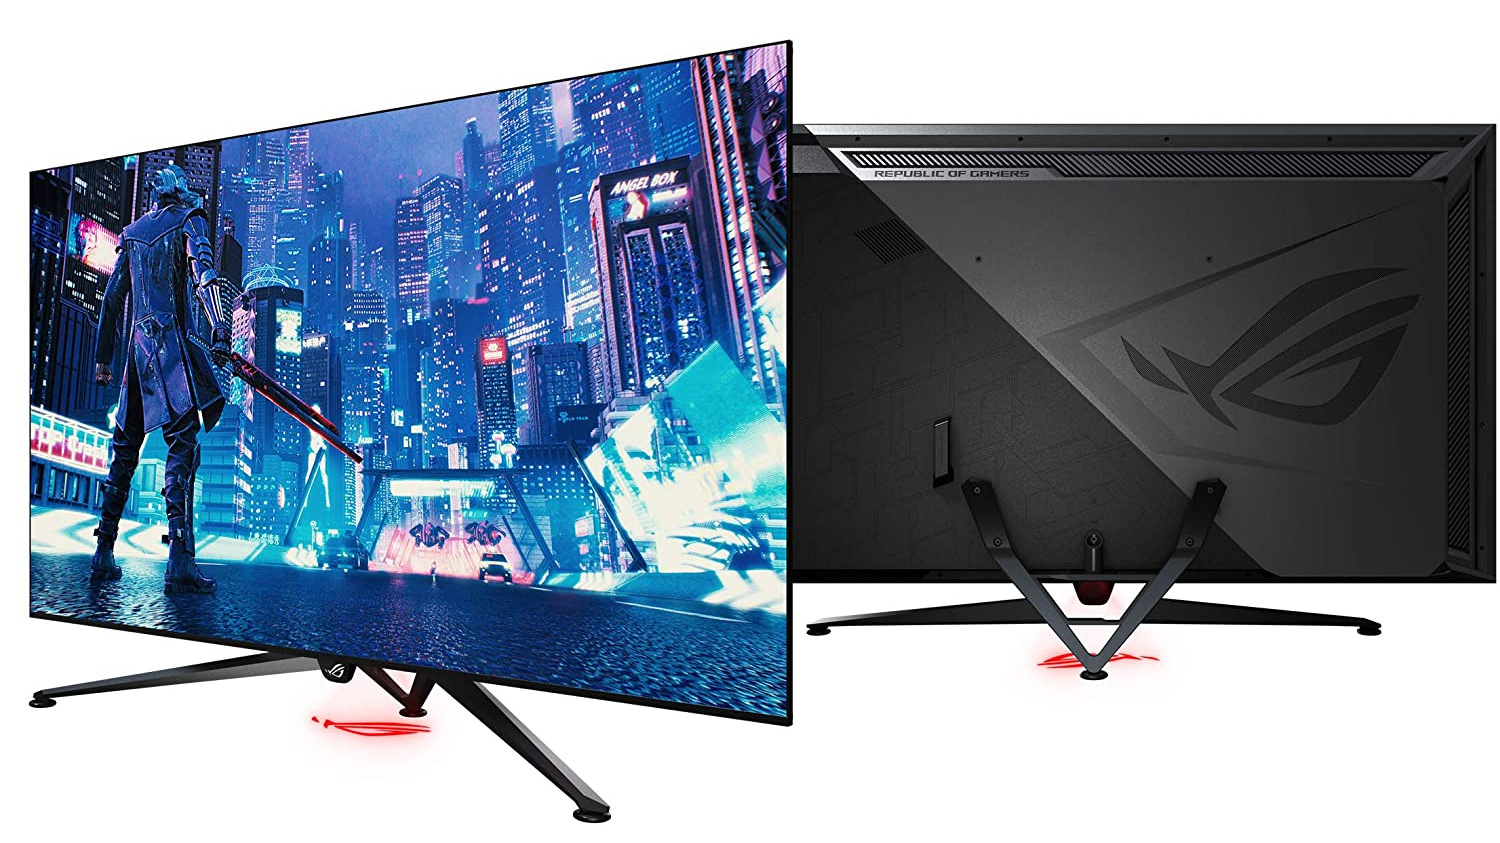 Pre-Orders Of This Monitor From Datablitz Come With A Free Ps5